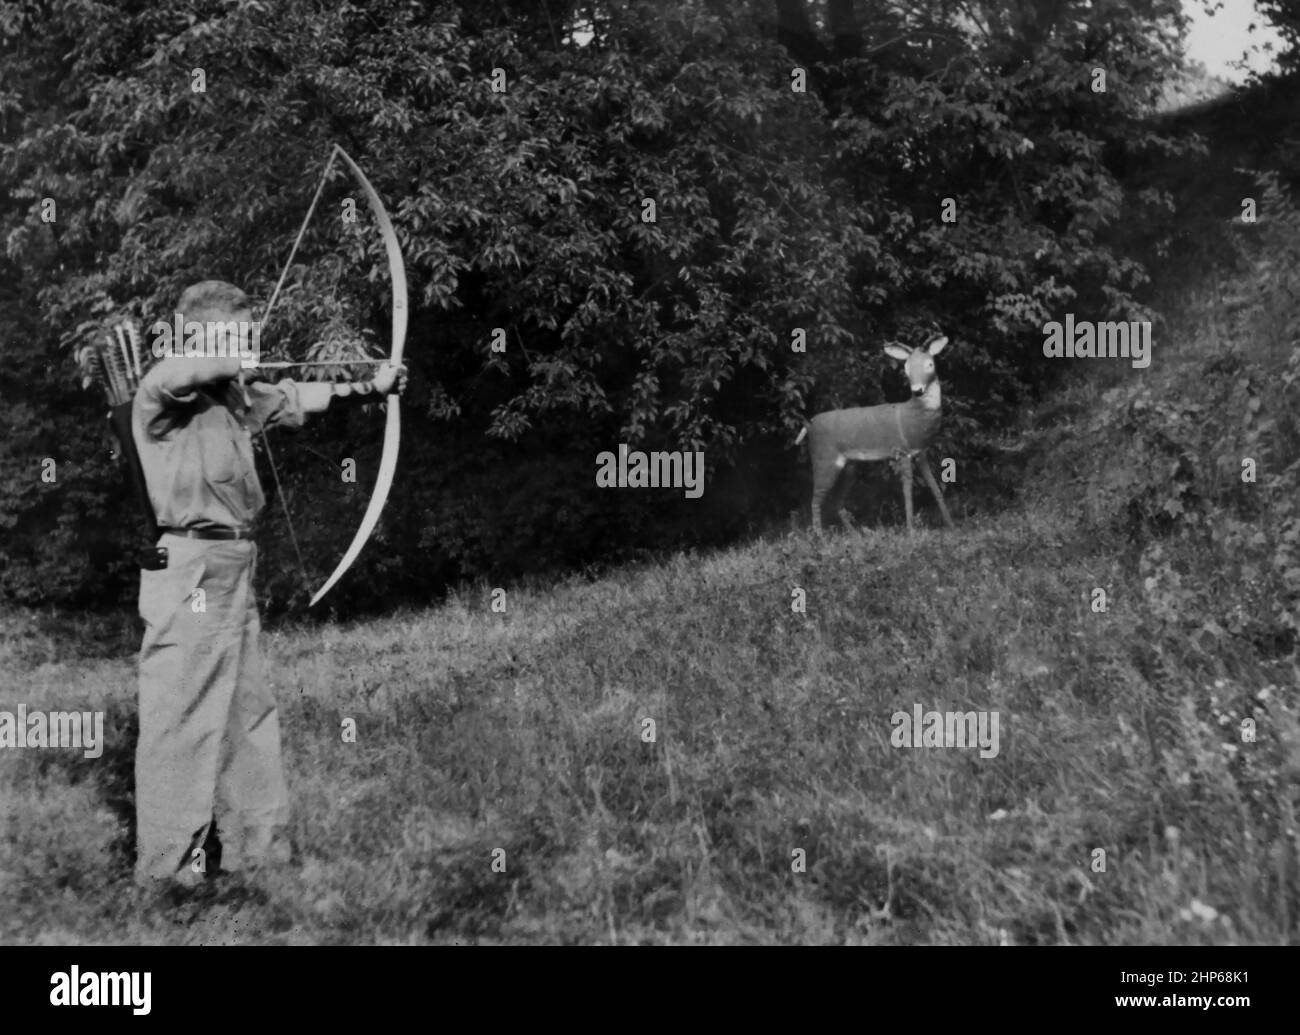 A man practices his bow and arrow skills on a fake deer, ca 1950. Stock Photo